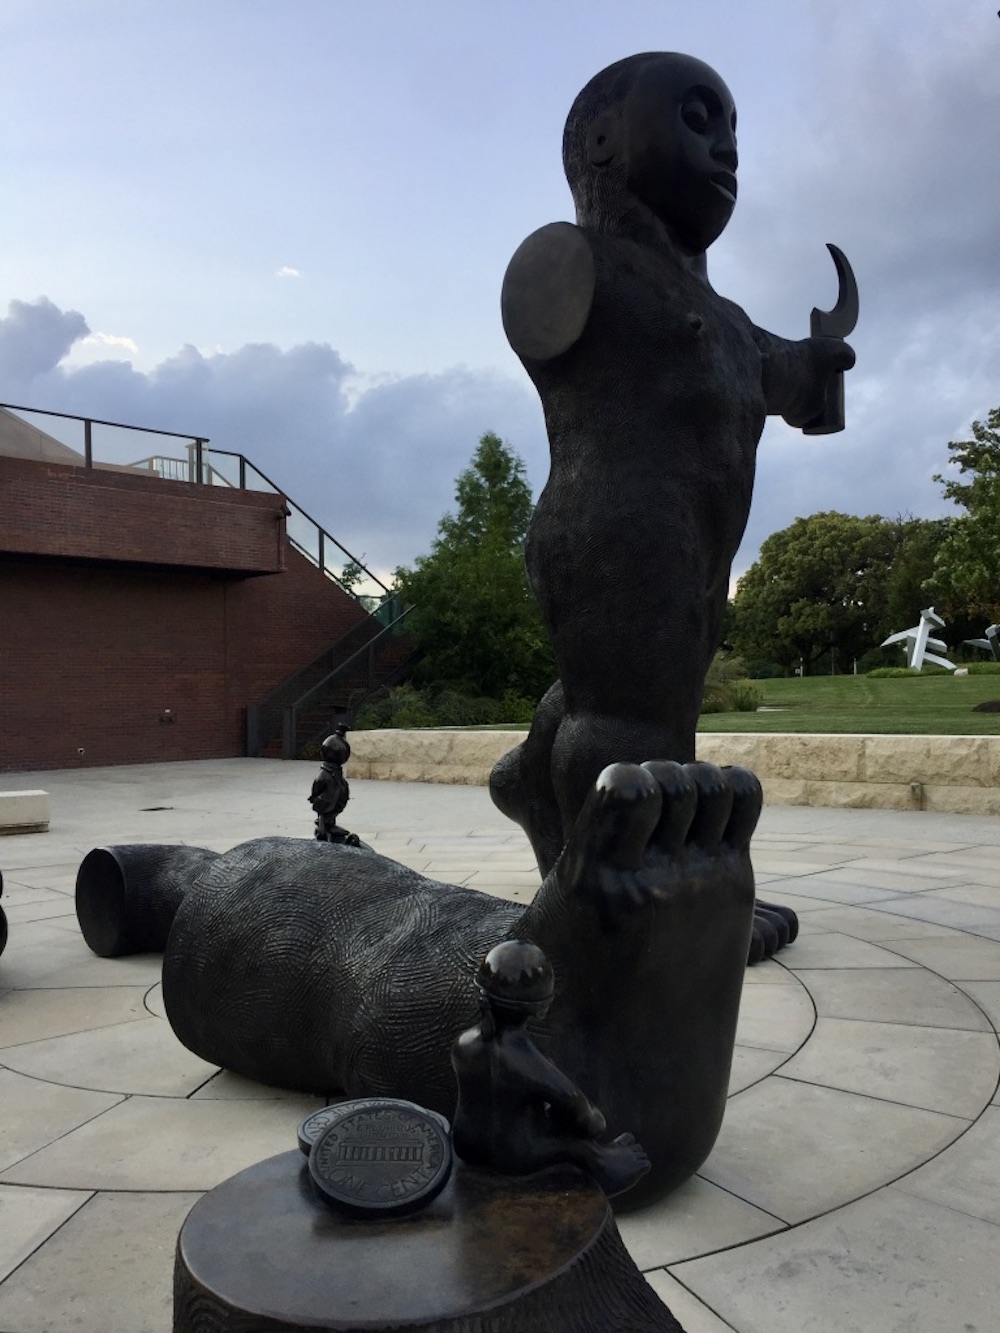 Tall metal sculpture with severed limbs outside of the Wichita Art Museum in Wichita, Kansas